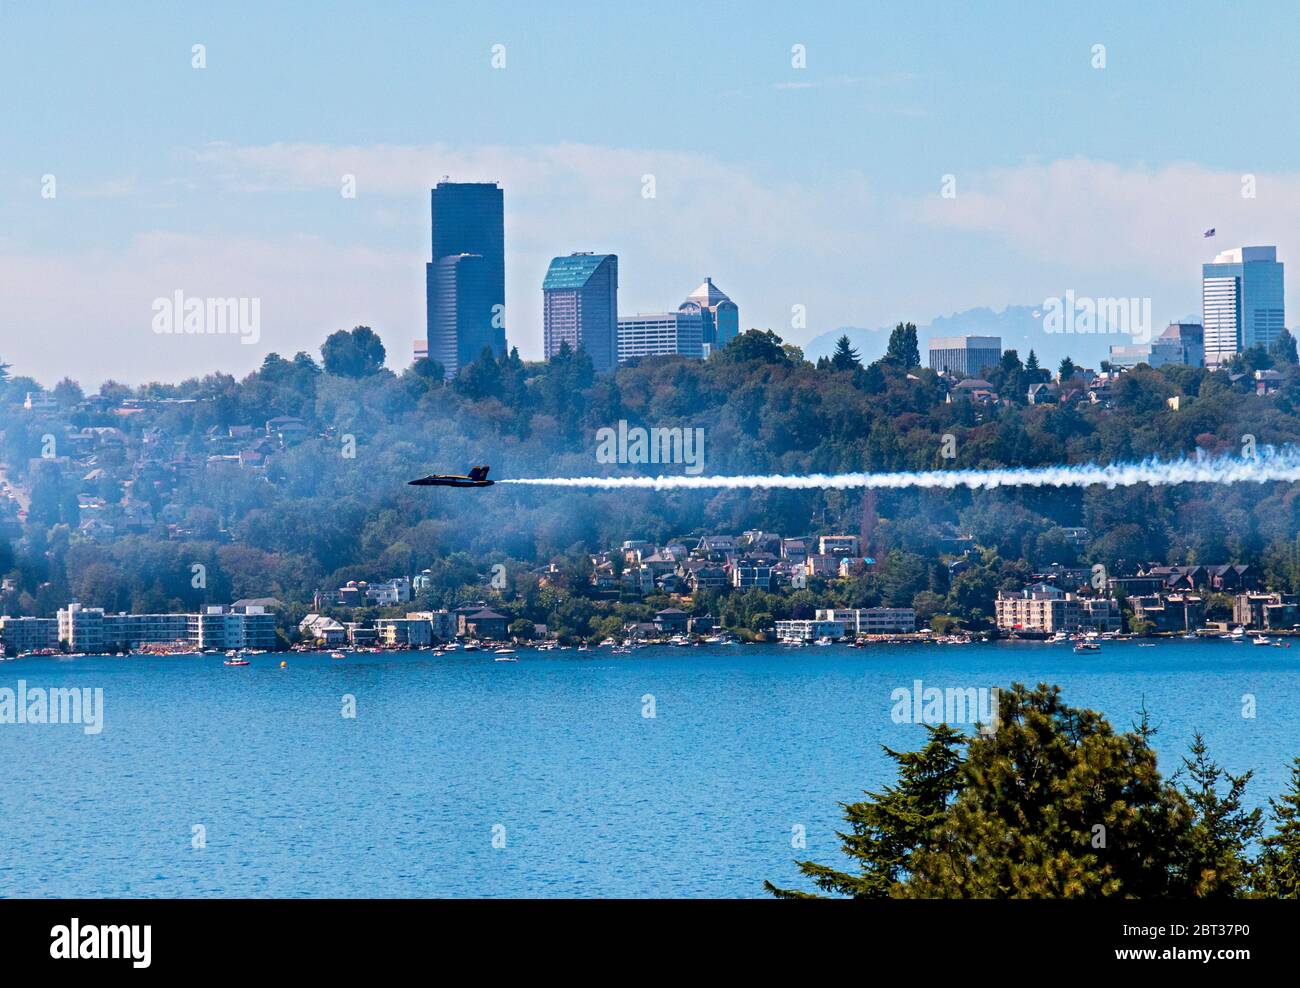 The Blue Angels performing over Seattle during the 2015 Seafair Air Show. The Blue Angels team is the United States Navy's flight demonstration squadron, with aviators from the Navy and Marines. It was formed in 1946, making it the second oldest formal flying aerobatic team in the world. The Blue Angels' six demonstration pilots fly the F/A-18 Hornet, typically in more than 70 shows at 34 locations throughout the United States each year, where they still employ many of the same practices and techniques used in their aerial displays in 1946. Stock Photo